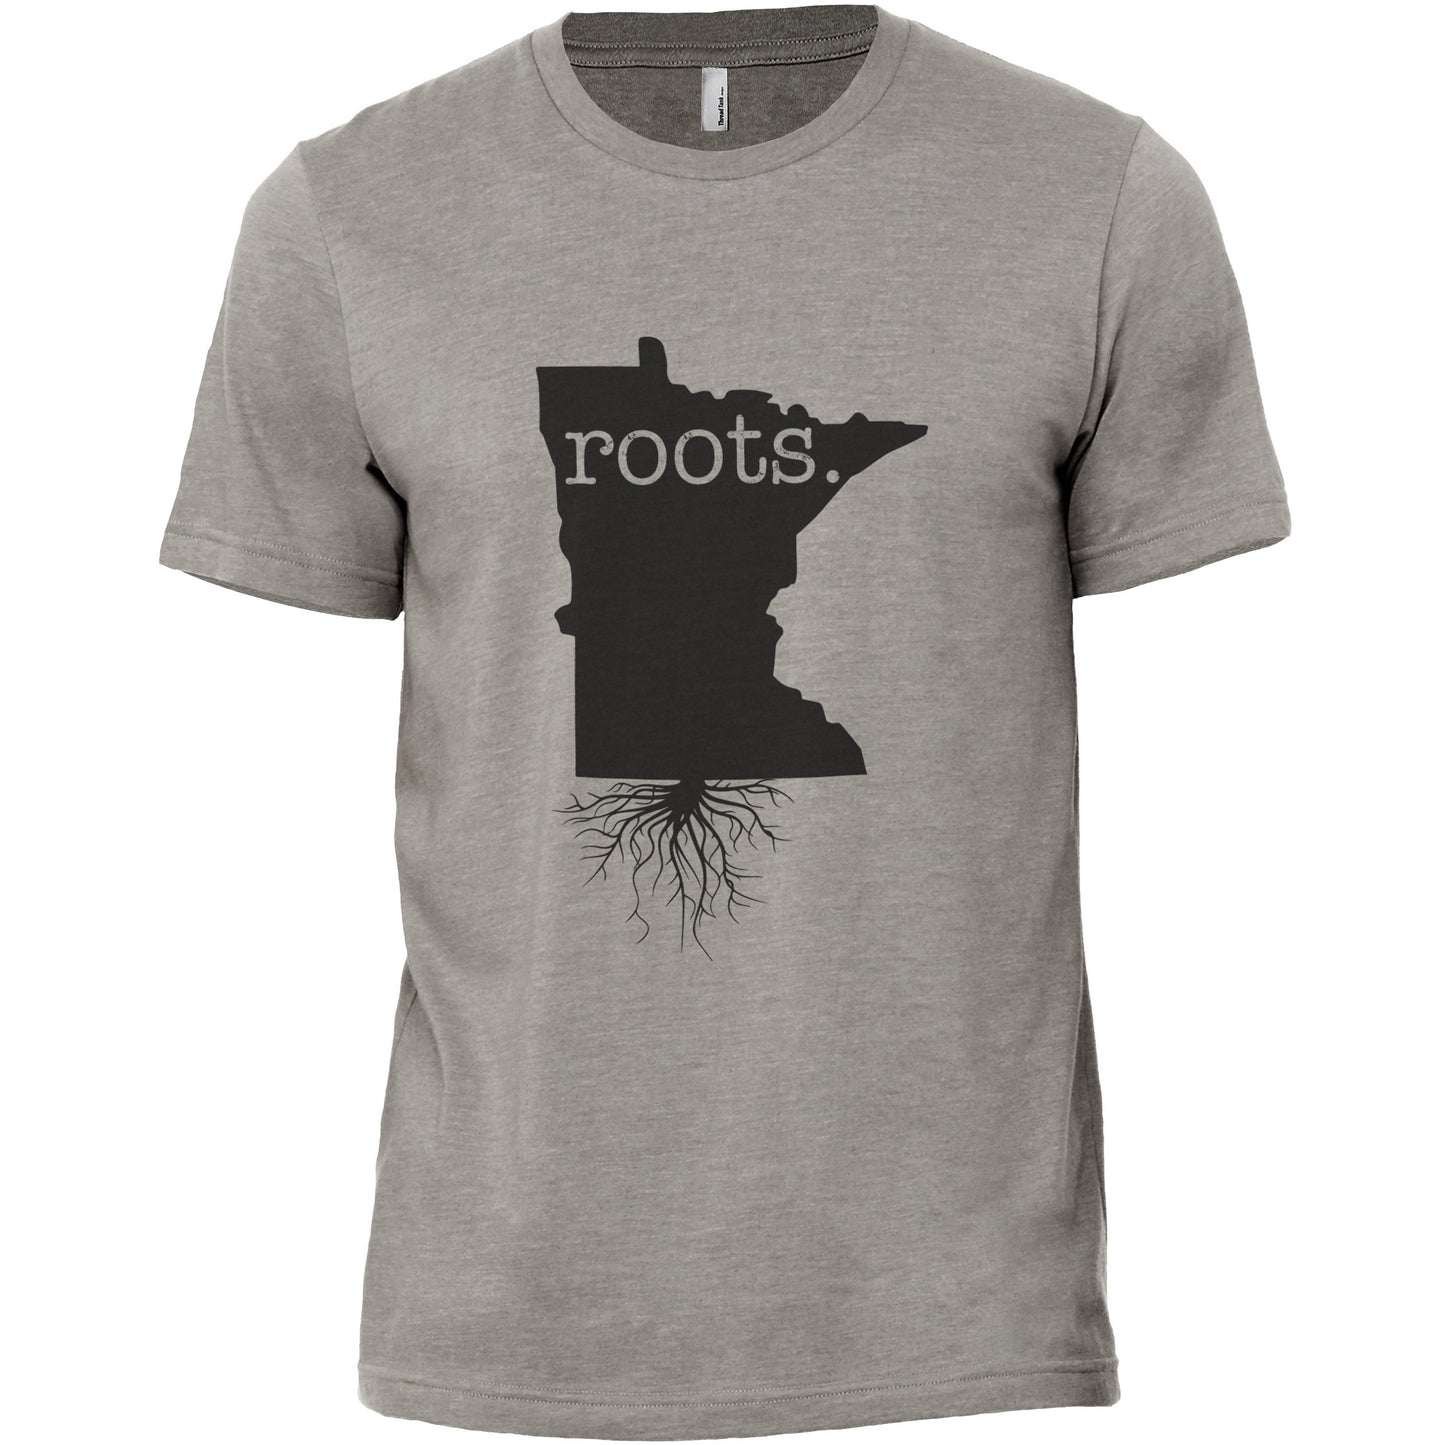 Home Roots State Minnesota MN Military Grey Printed Graphic Men's Crew T-Shirt Tee